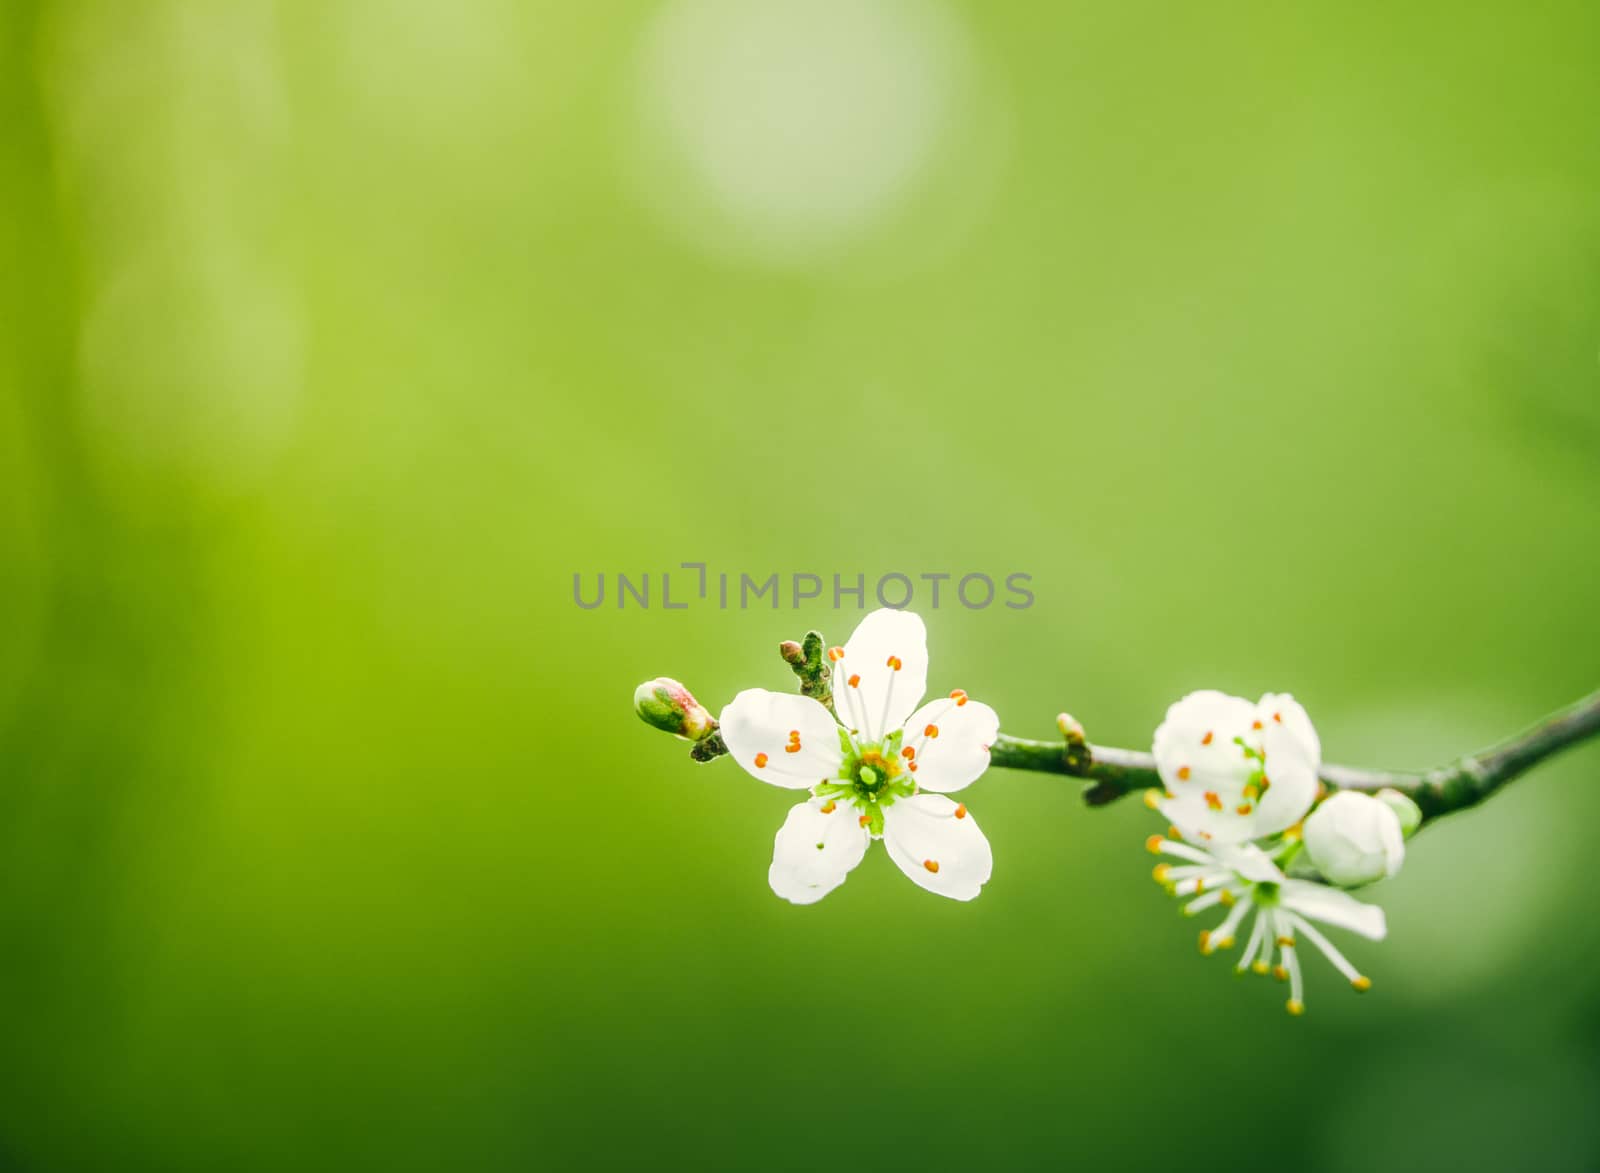 Beautiful Blossoming Tree With Copy Space And Shallow Focus